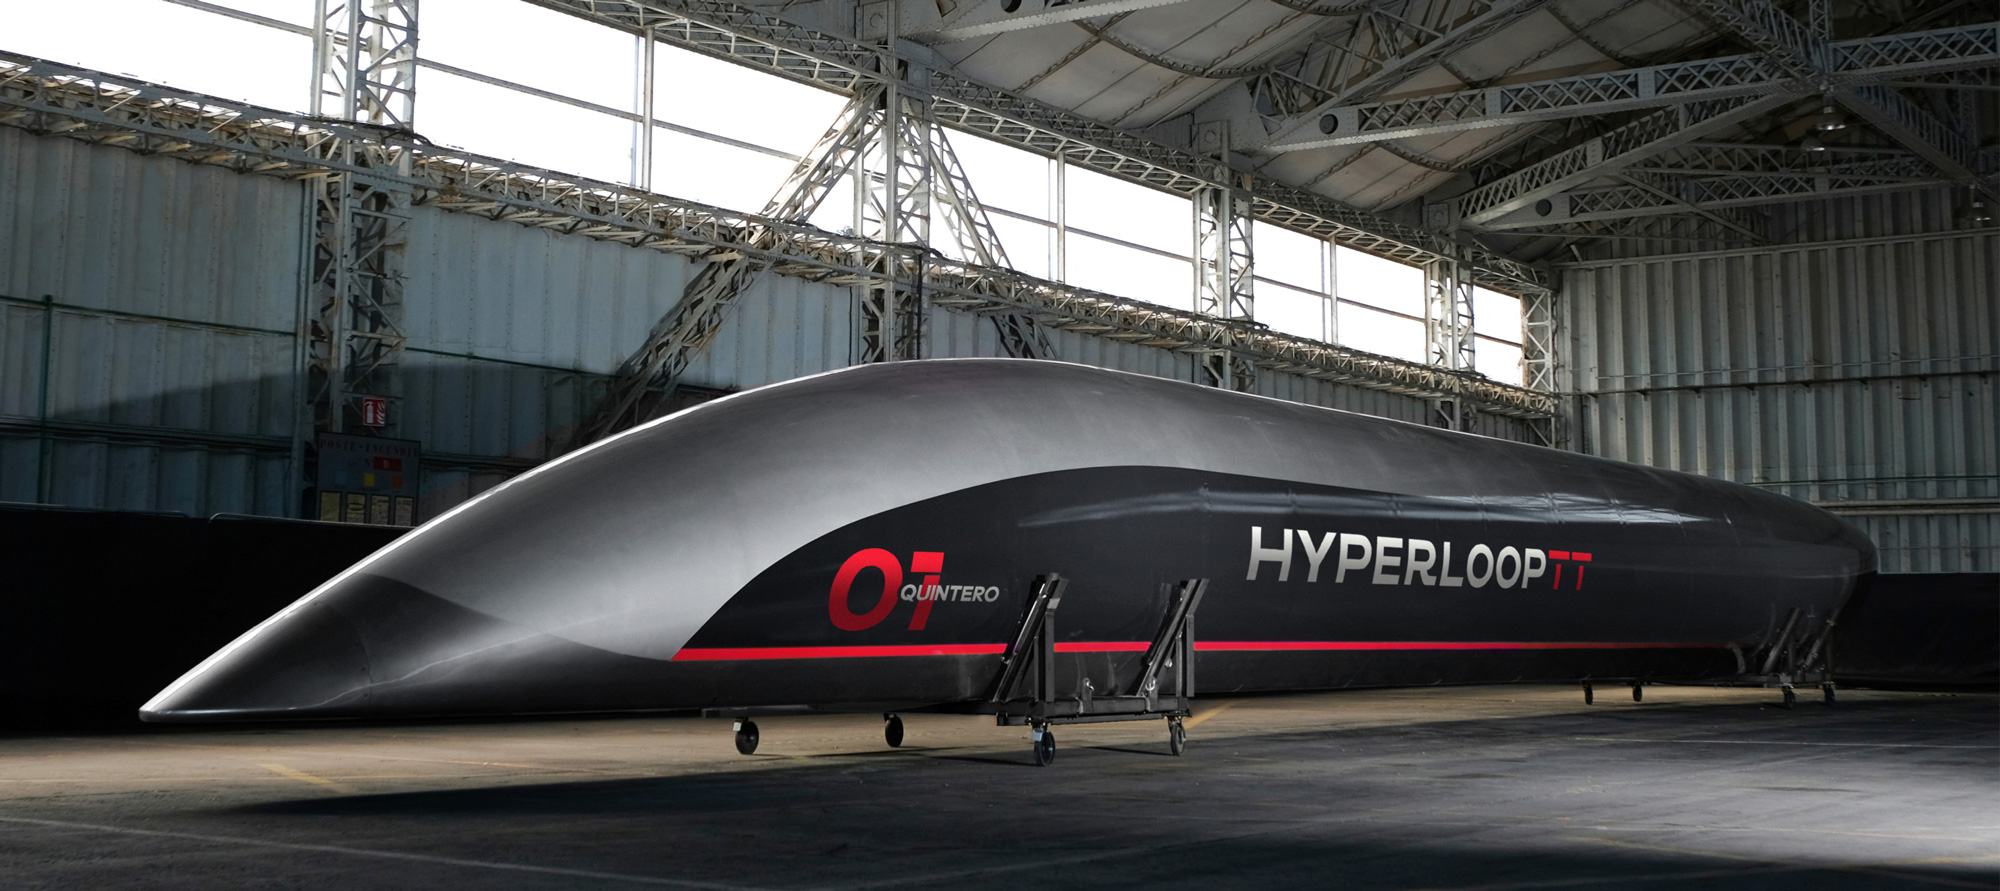 New Logo and Identity for HyperloopTT by Saffron